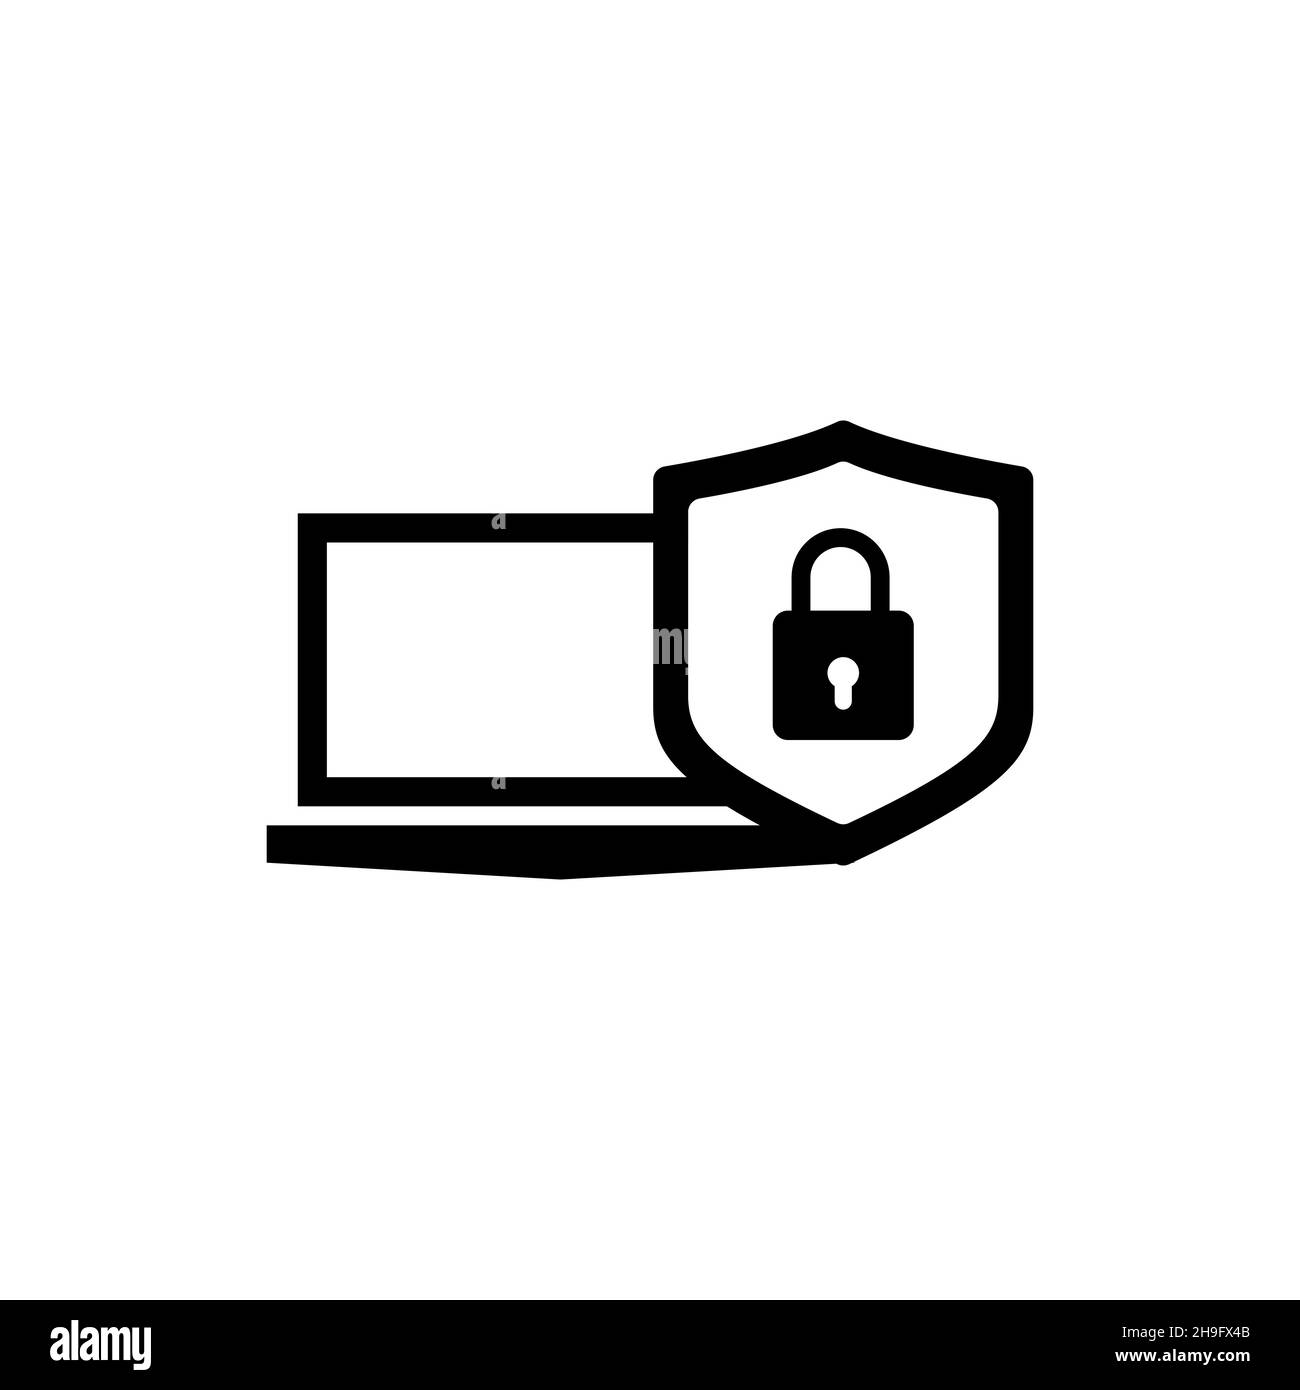 Laptop data security icon. Protected shield, antivirus, cyber security concept icon isolated on white background. Stock Vector